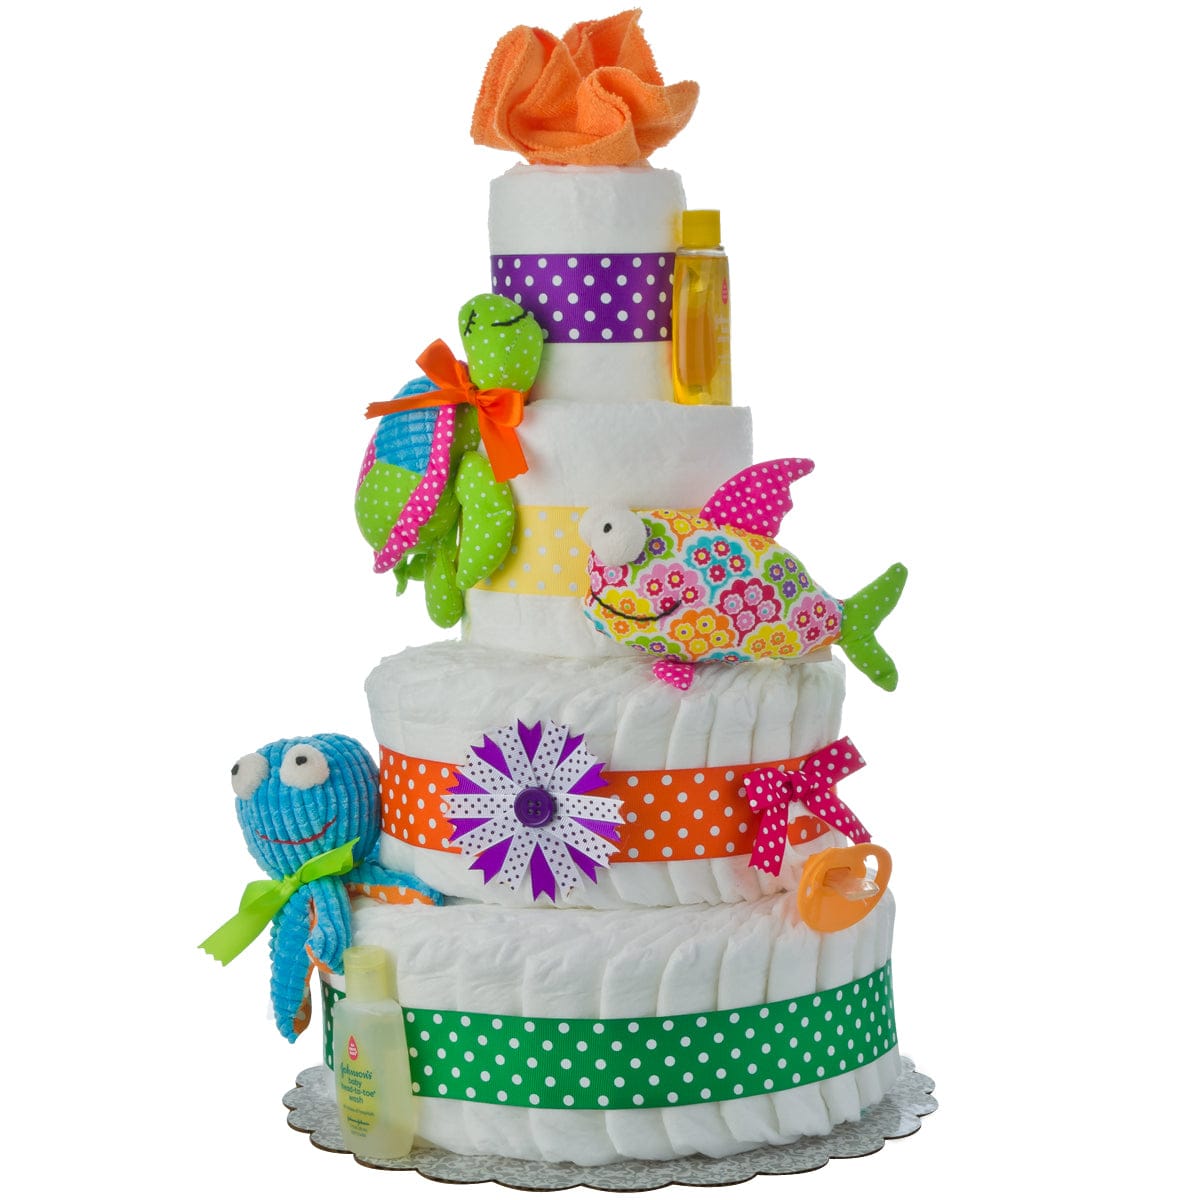 Lil' Baby Cakes My Lil' Sea Friends 4 Tier Baby Diaper Cake